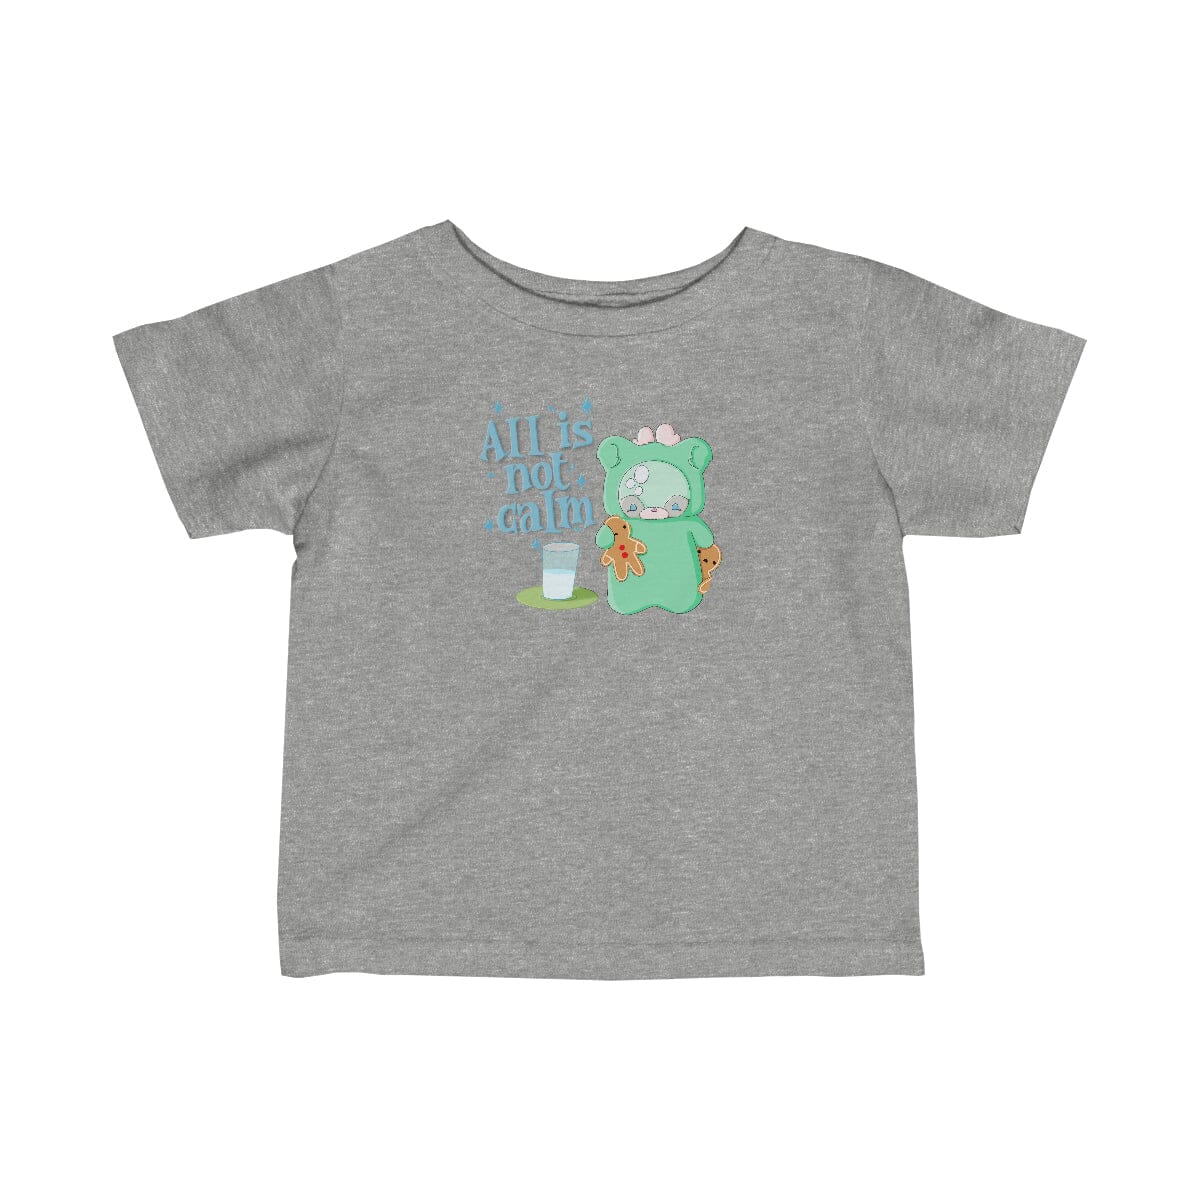 The Griswold Infant Tee